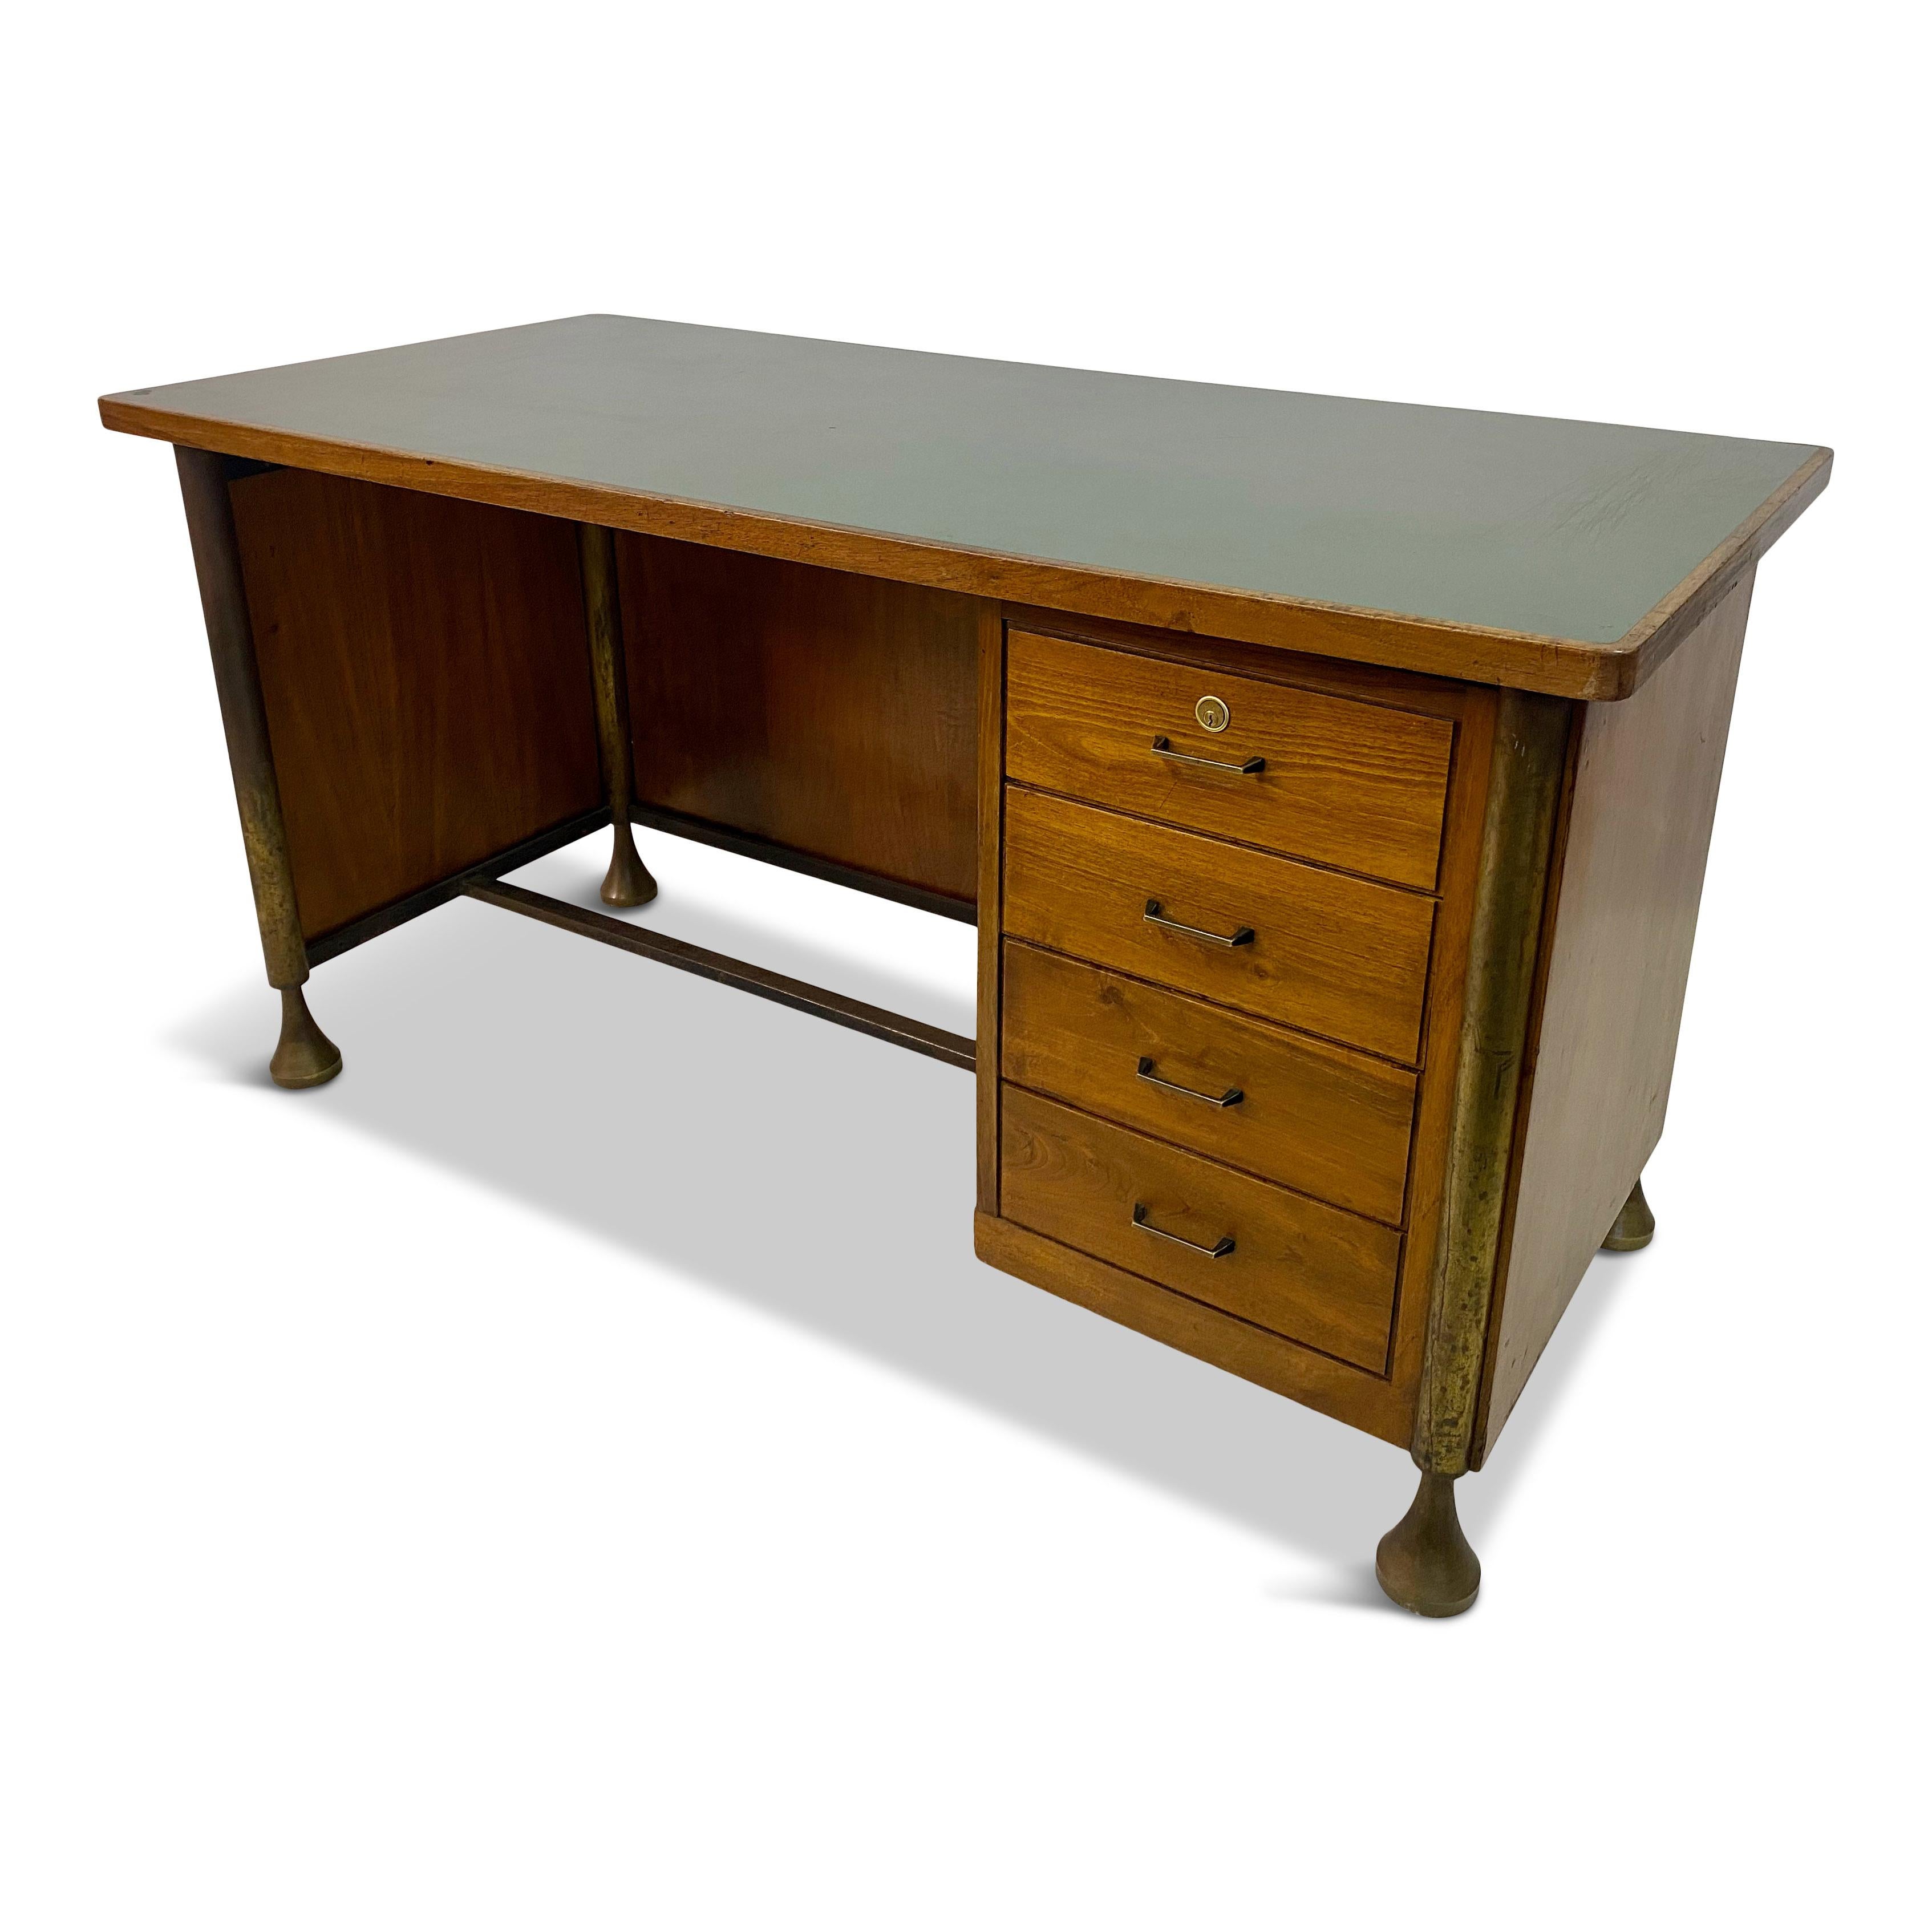 Walnut desk

Bronze legs

Formica top

Black painted brass handles

Lockable top drawer with key

Bronze legs reminiscent of ones used on tables designed by Angelo Mangiarotti

Italy 1950s.
 